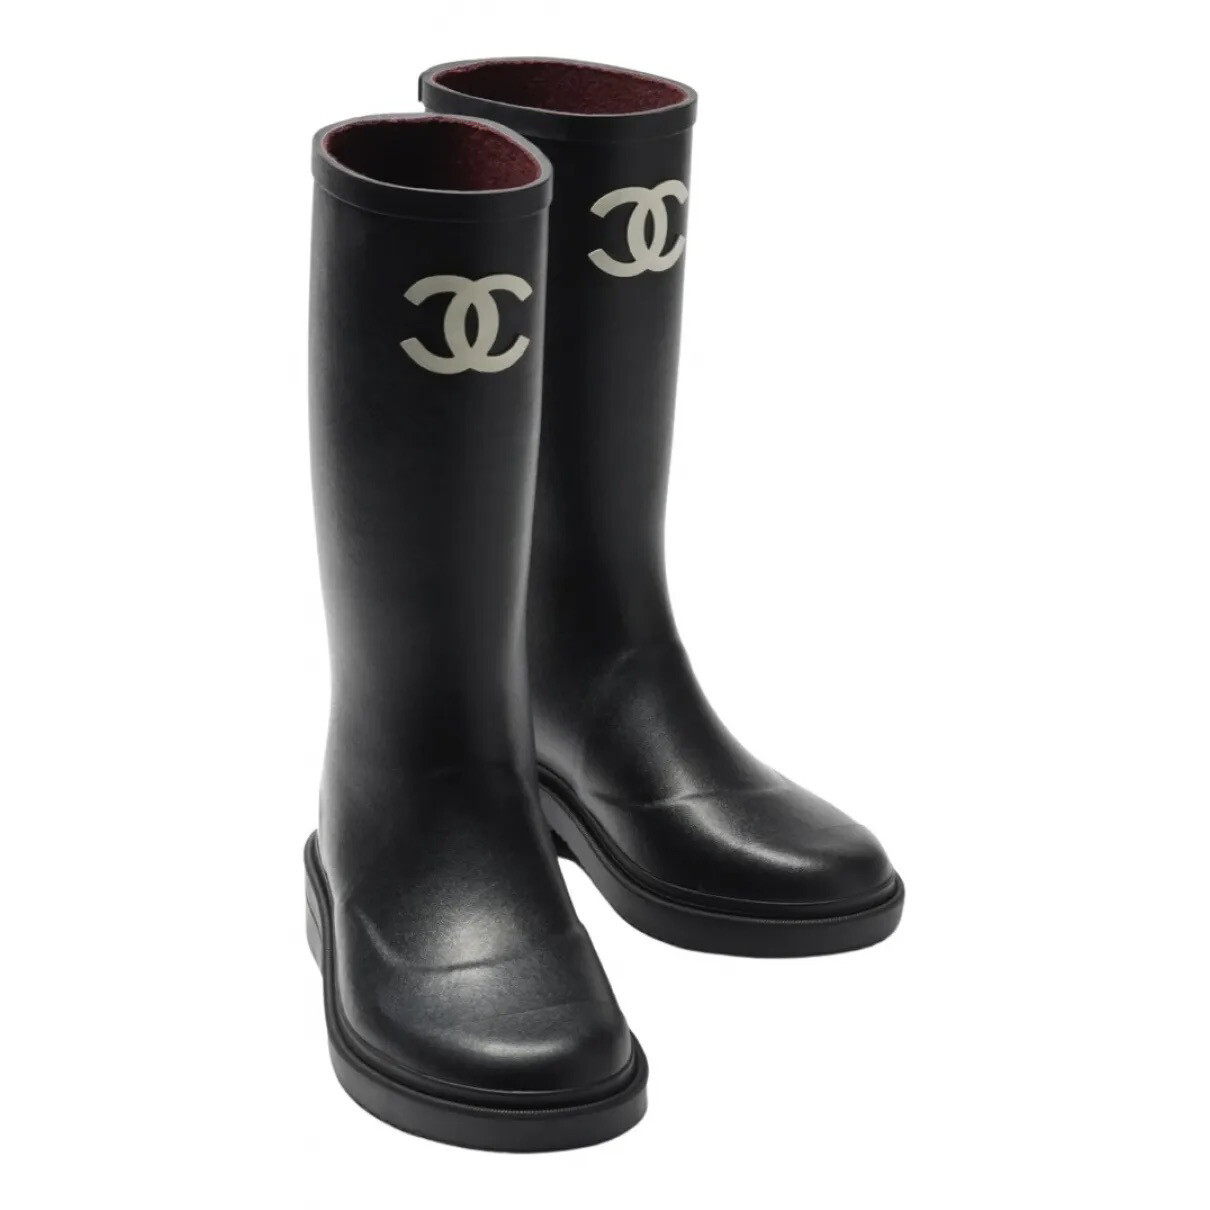 Chanel Shoes Rain Boots Wellies Black, New in Box MA001